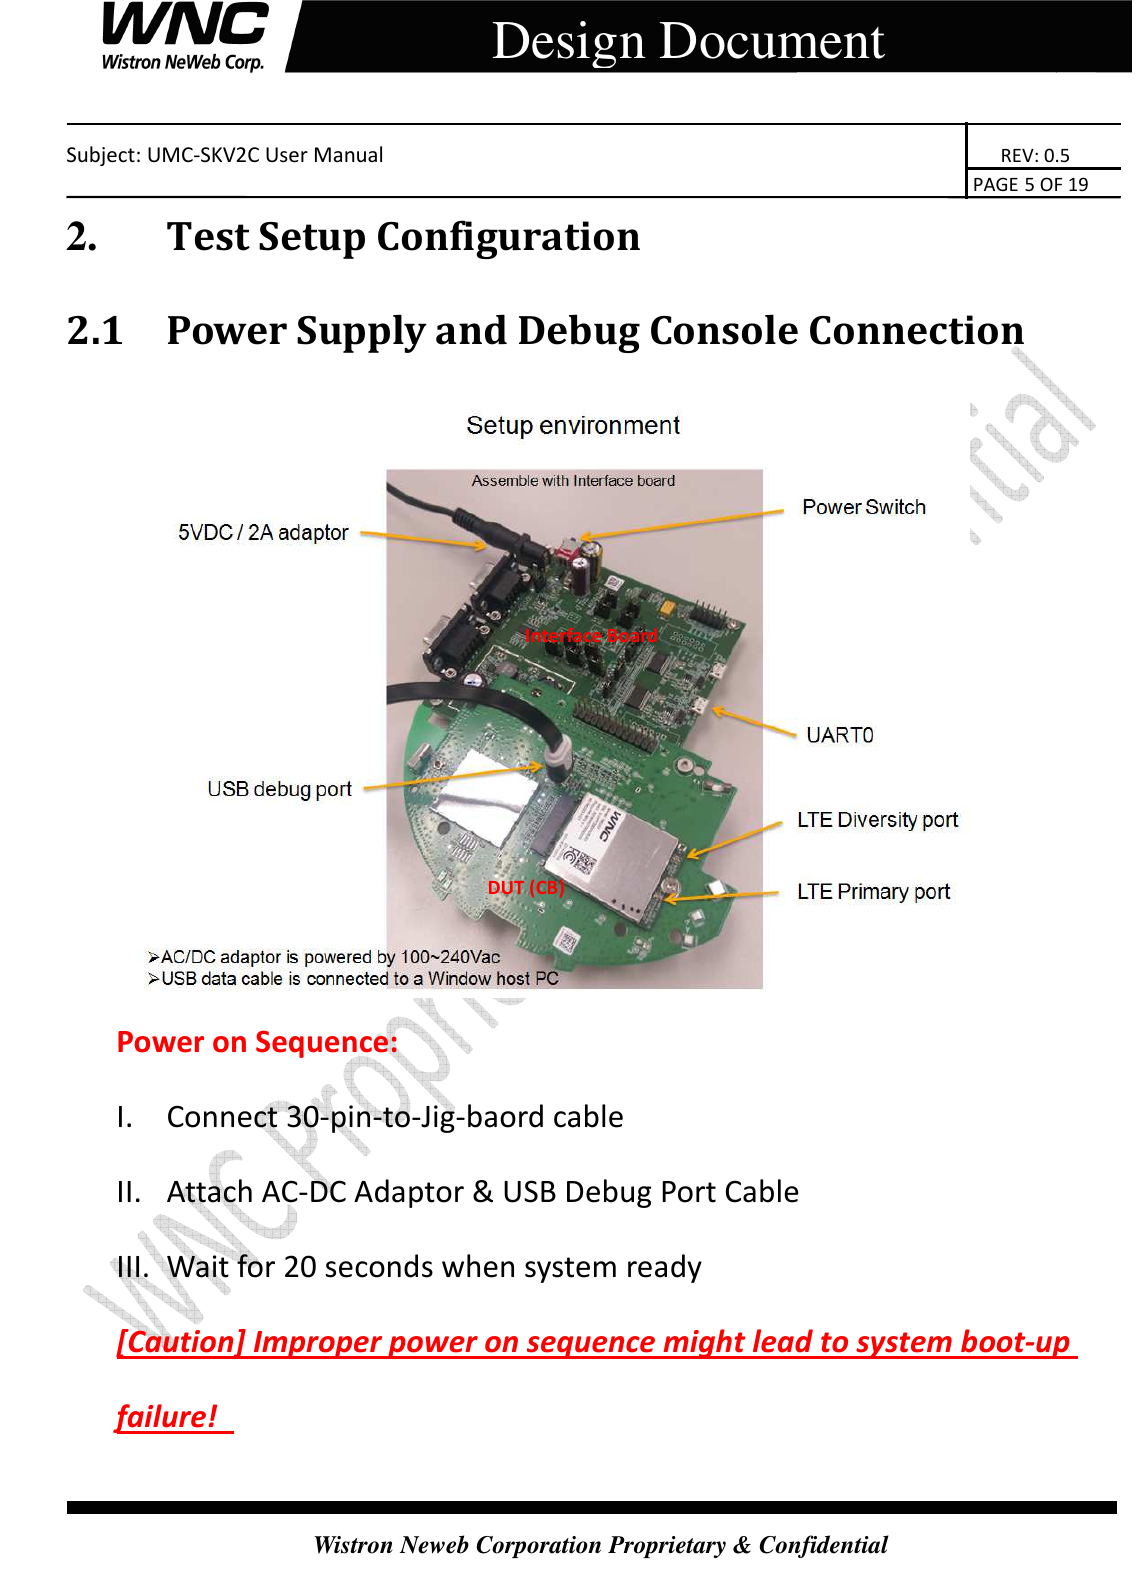    Subject: UMC-SKV2C User Manual                                                                       REV: 0.5                                                                                                                                                                               PAGE 5 OF 19  Wistron Neweb Corporation Proprietary &amp; Confidential     Design Document 2.       Test Setup Configuration 2.1 Power Supply and Debug Console Connection  Power on Sequence: I. Connect 30-pin-to-Jig-baord cable II. Attach AC-DC Adaptor &amp; USB Debug Port Cable III. Wait for 20 seconds when system ready [Caution] Improper power on sequence might lead to system boot-up failure!   Interface Board  DUT (CB) 